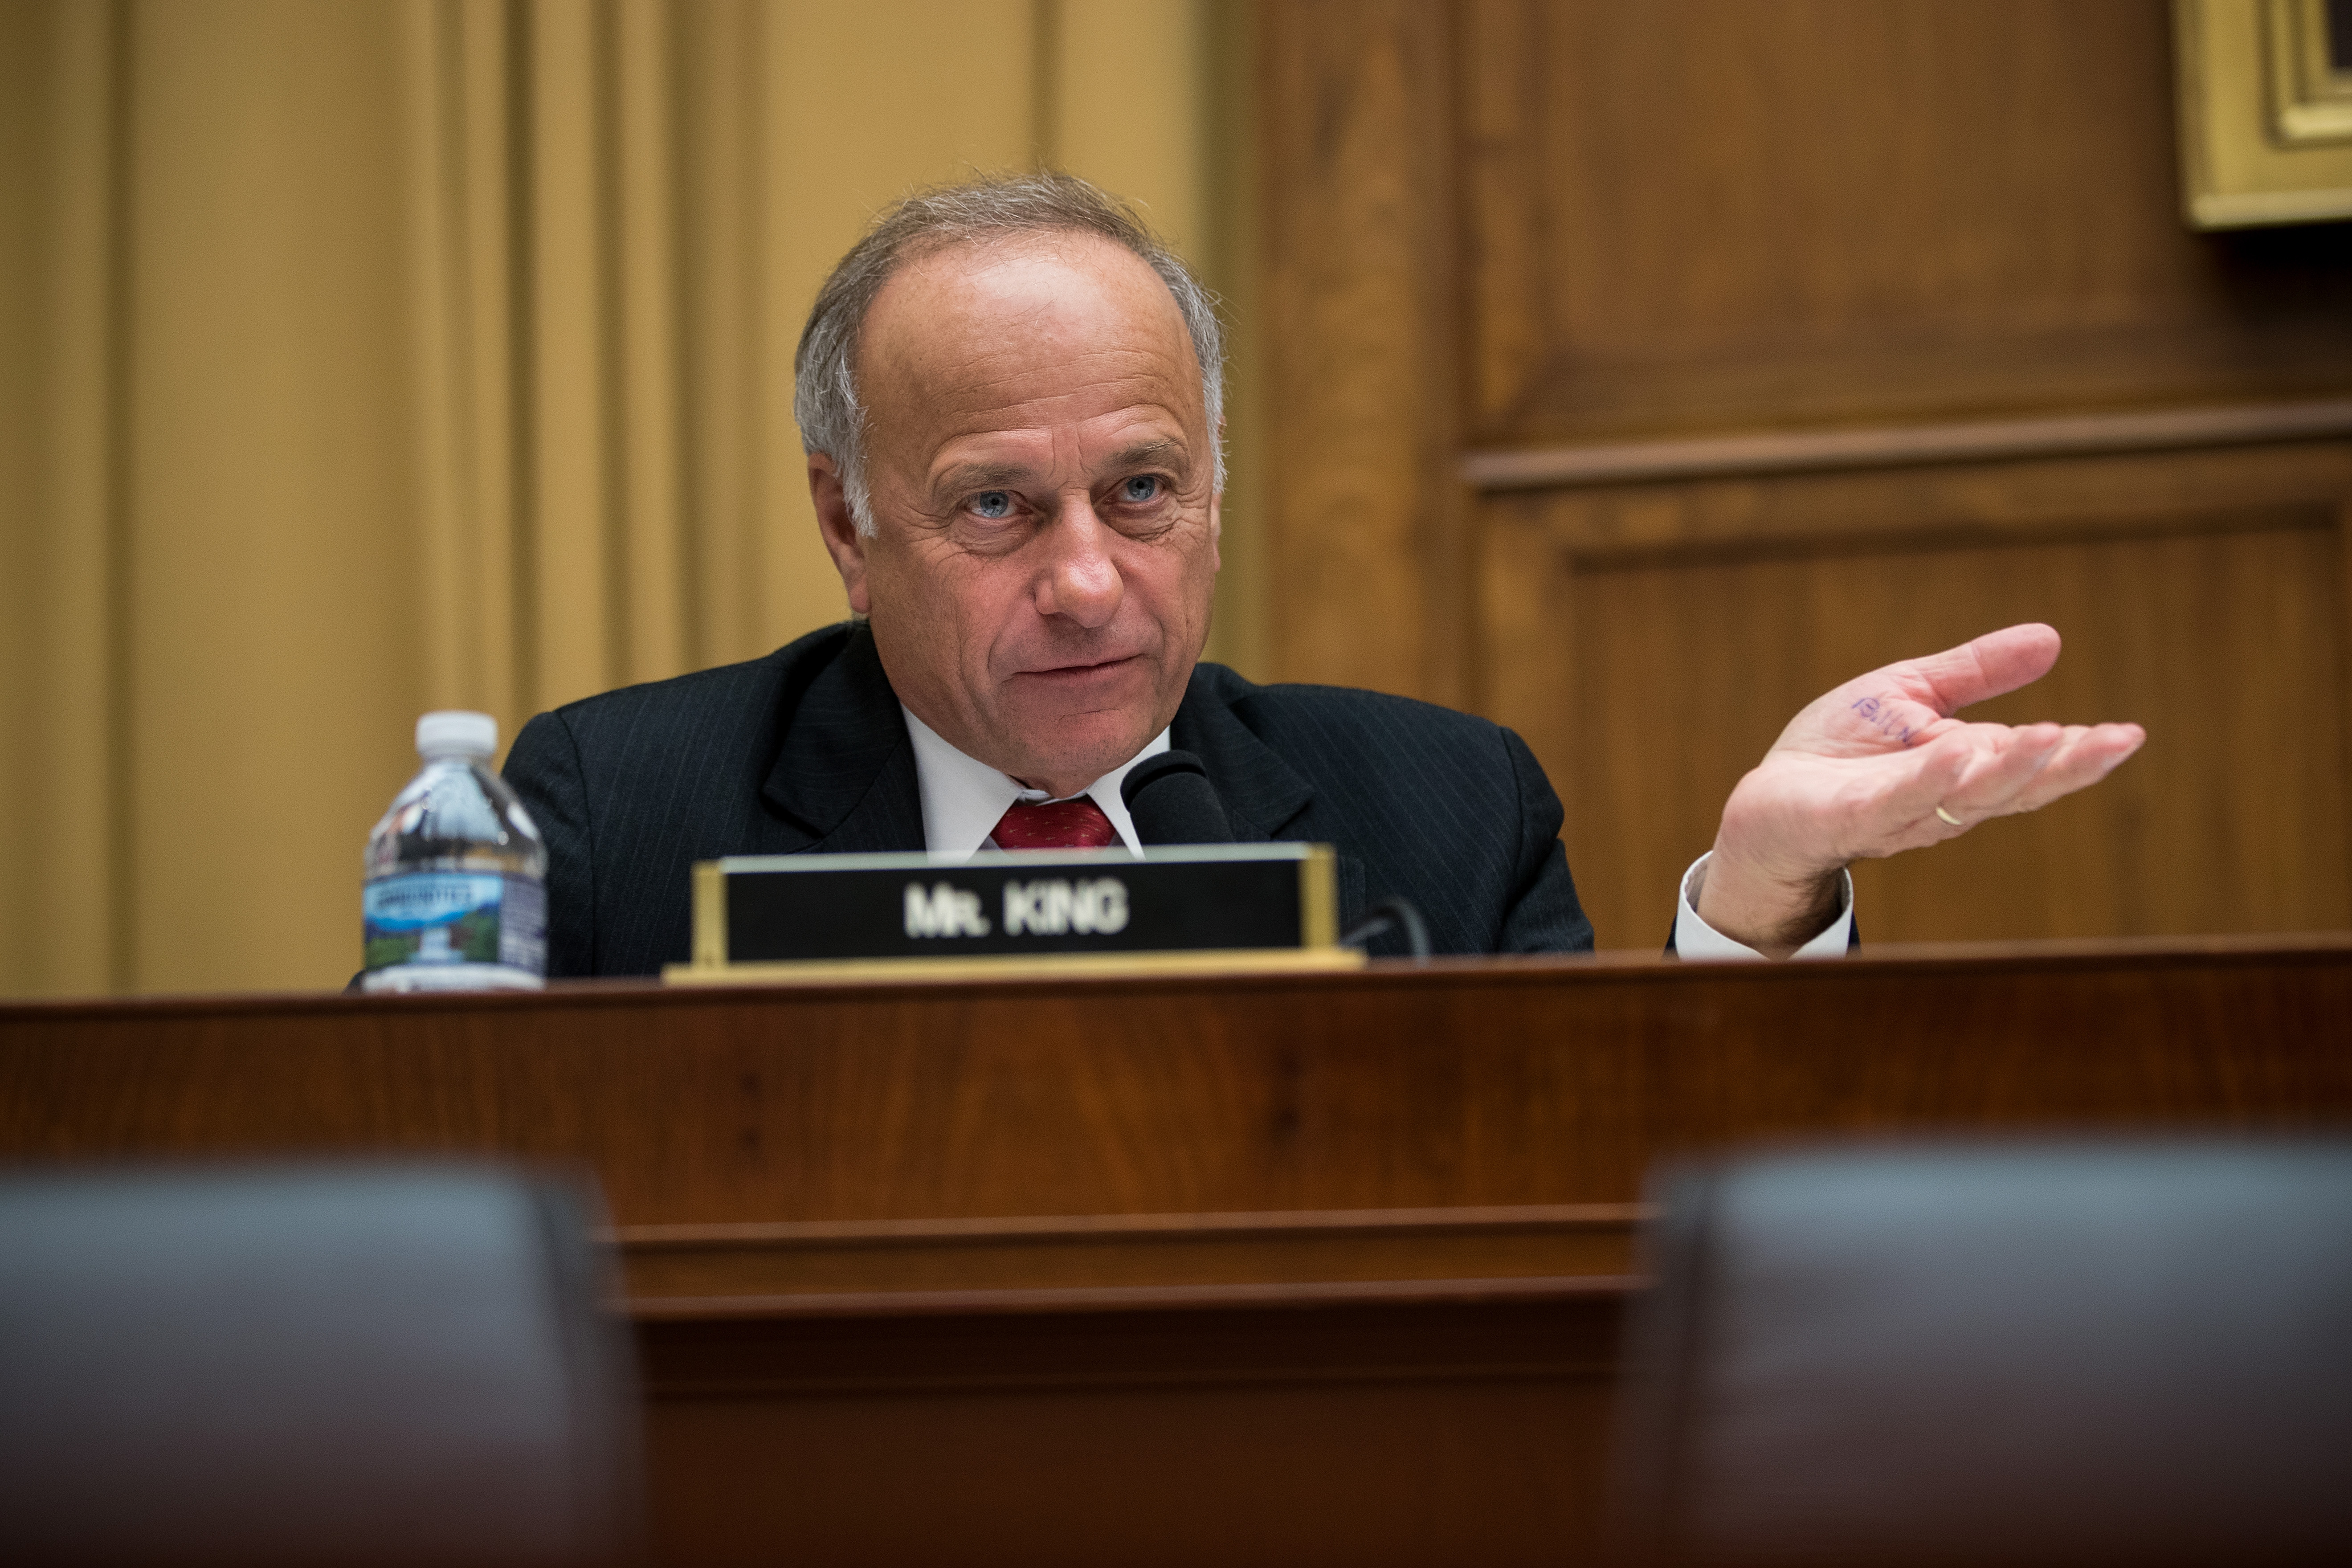 Rep. Steve King on Capitol Hill